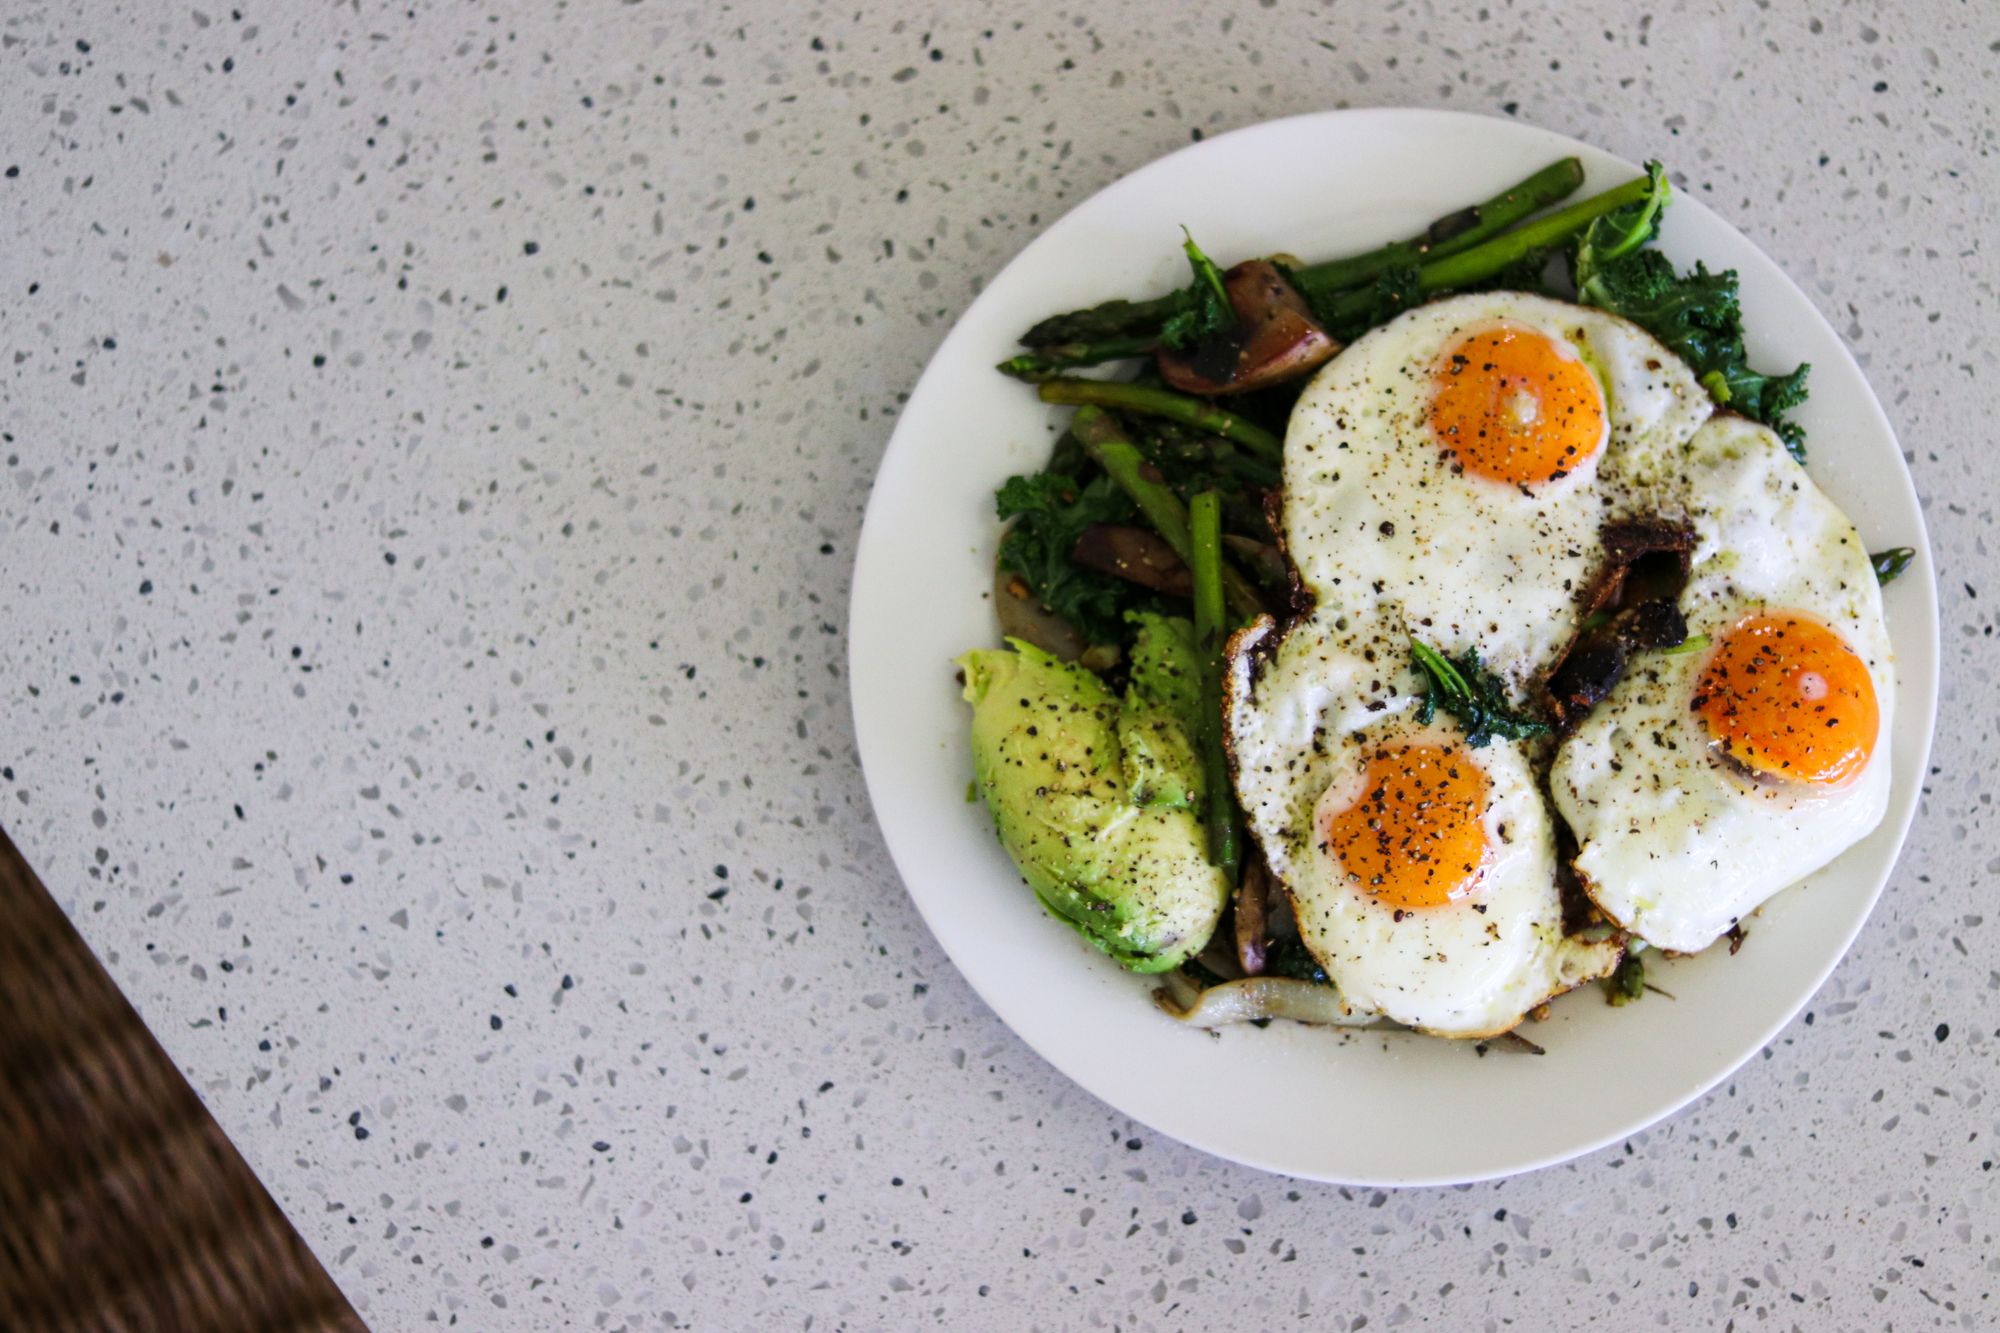 A simple study break meal to optimize mental performance (eggs and greens)